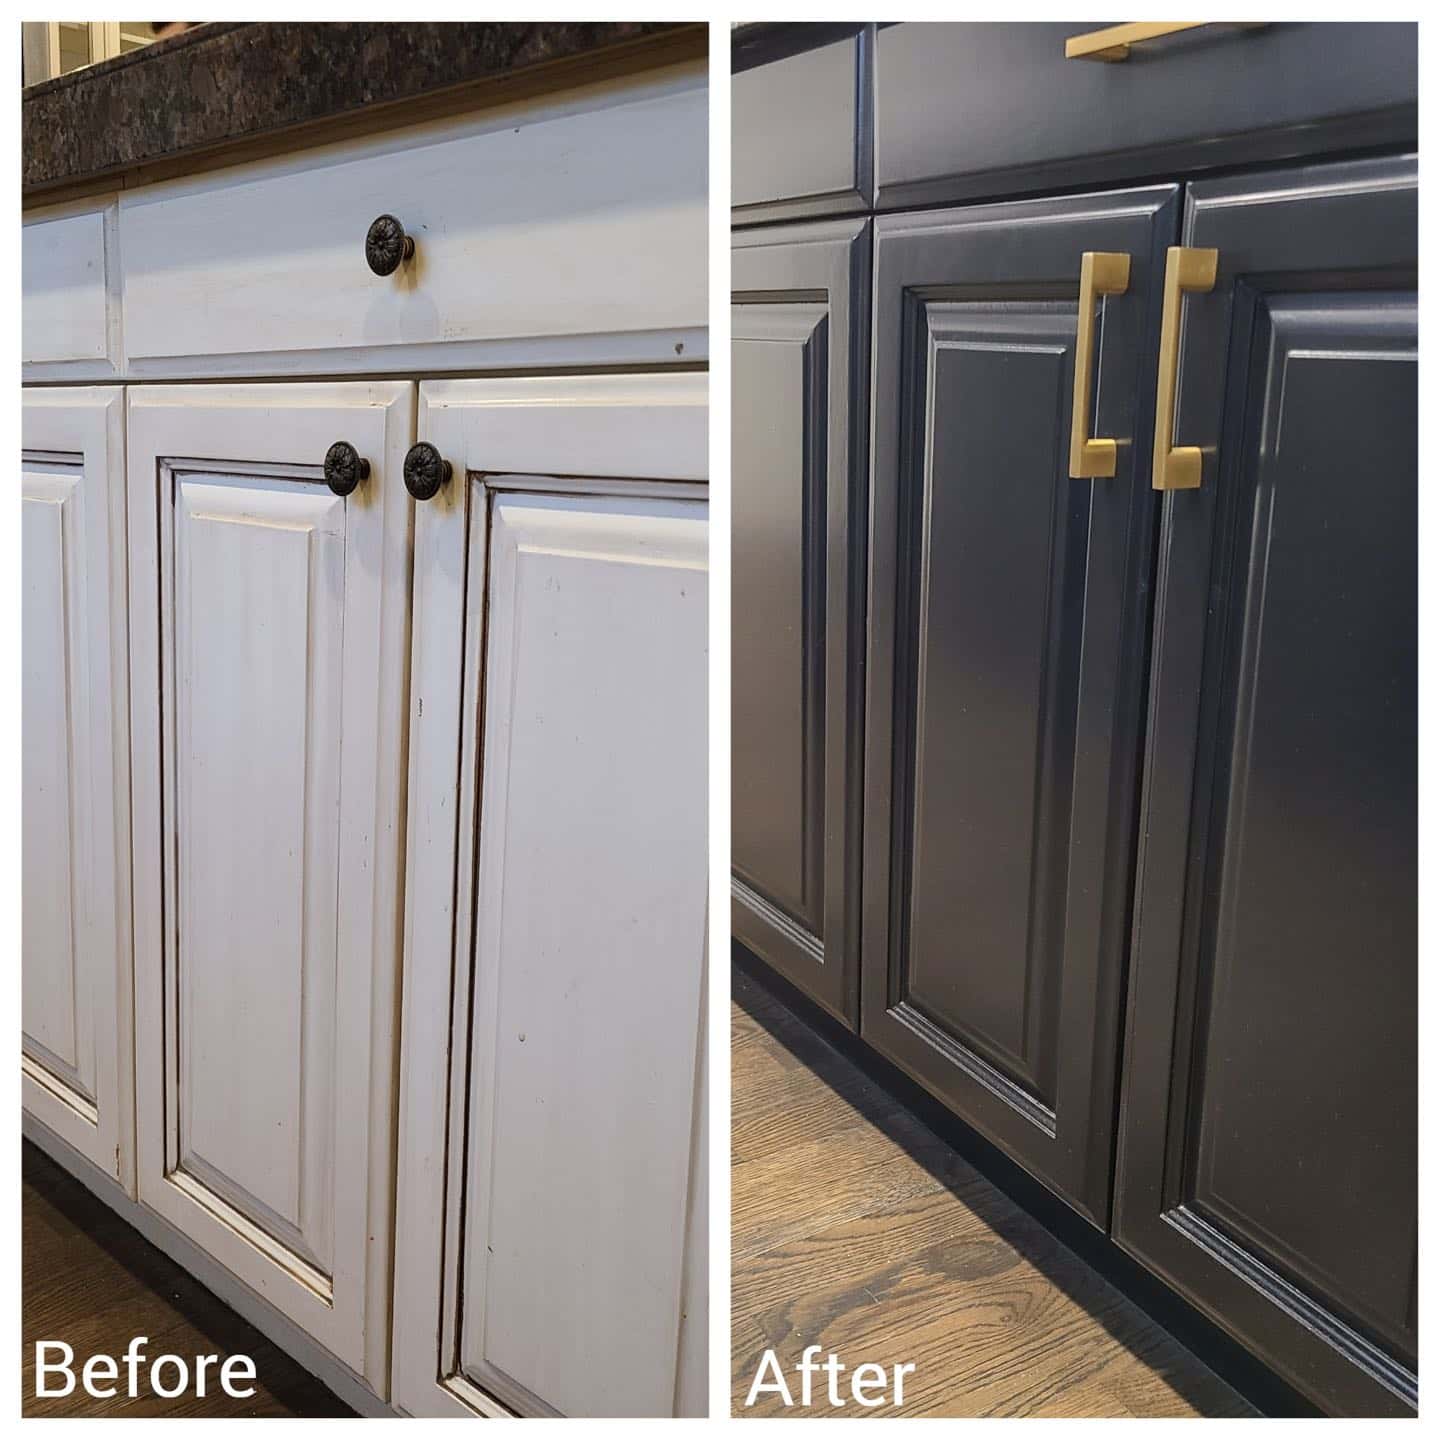 Before and after pictures of Tigard kitchen cabinet doors undergoing a modern makeover.